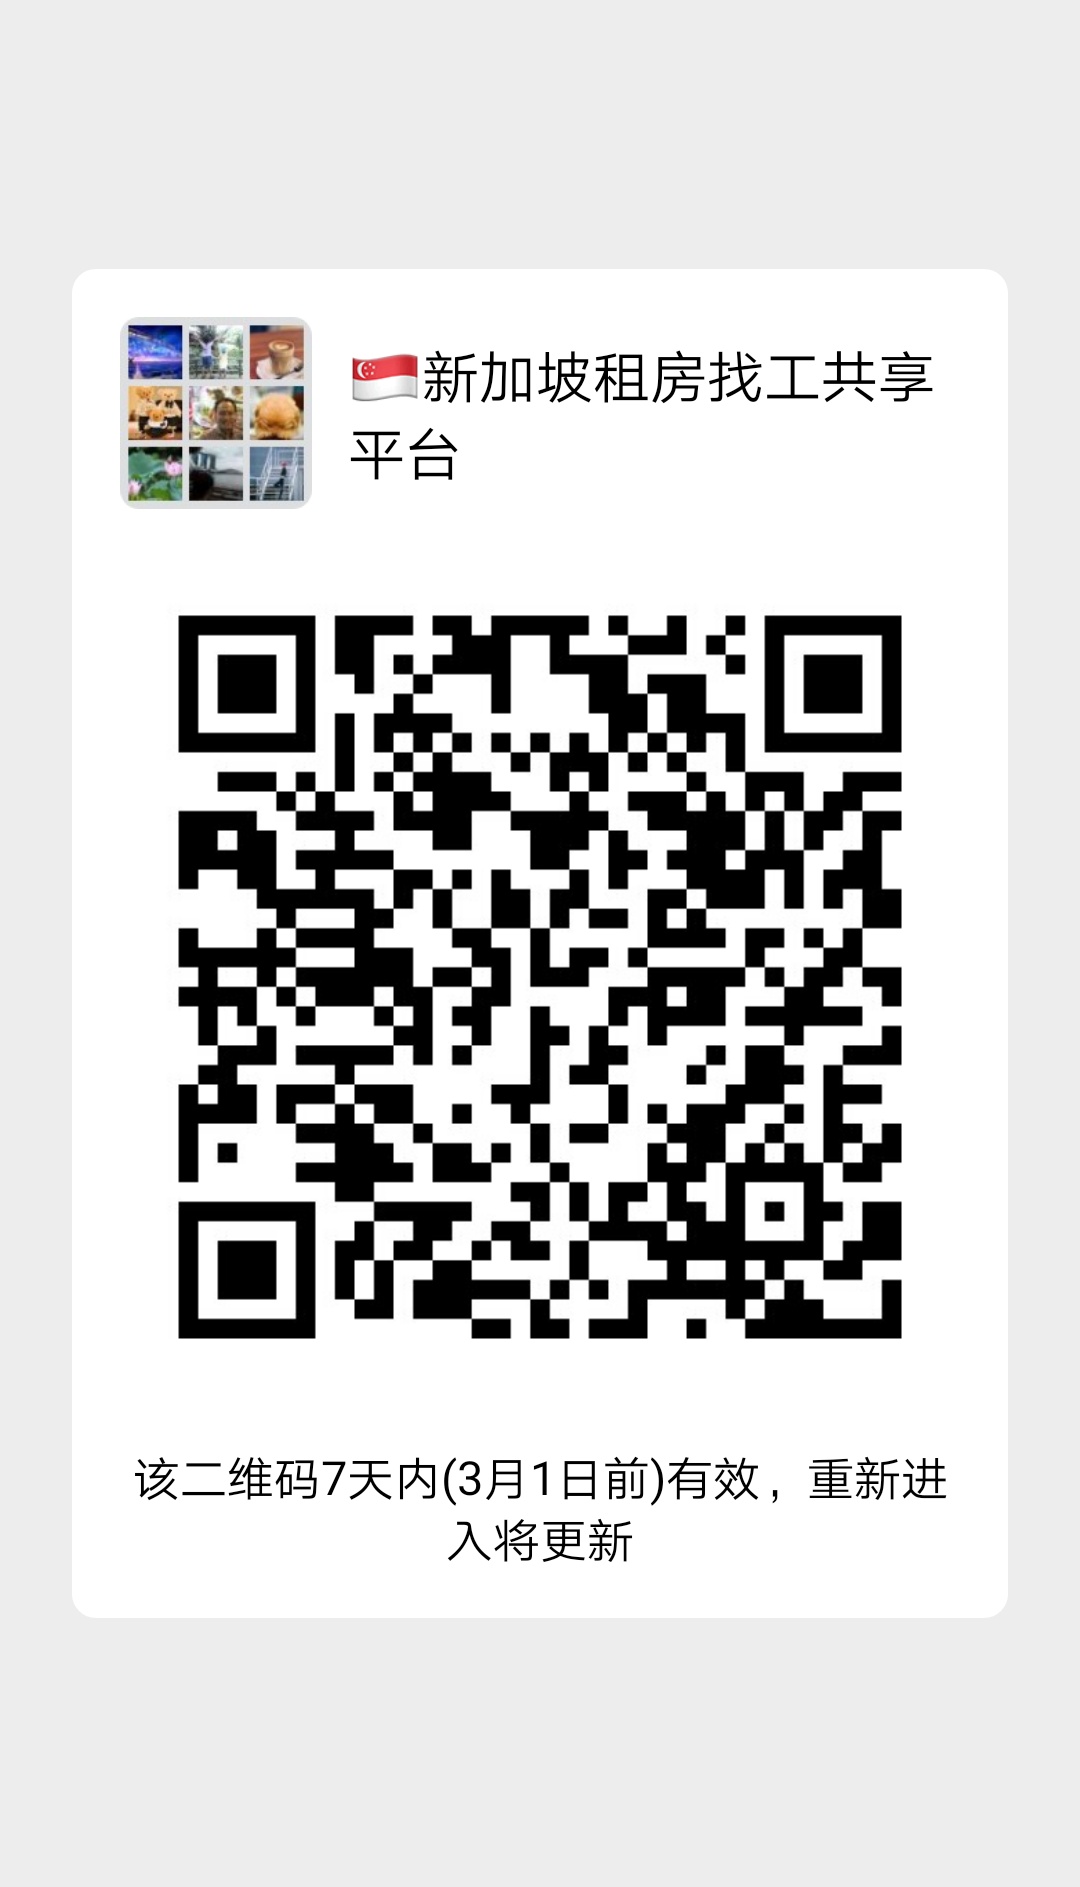 mmqrcode1582460701928.png